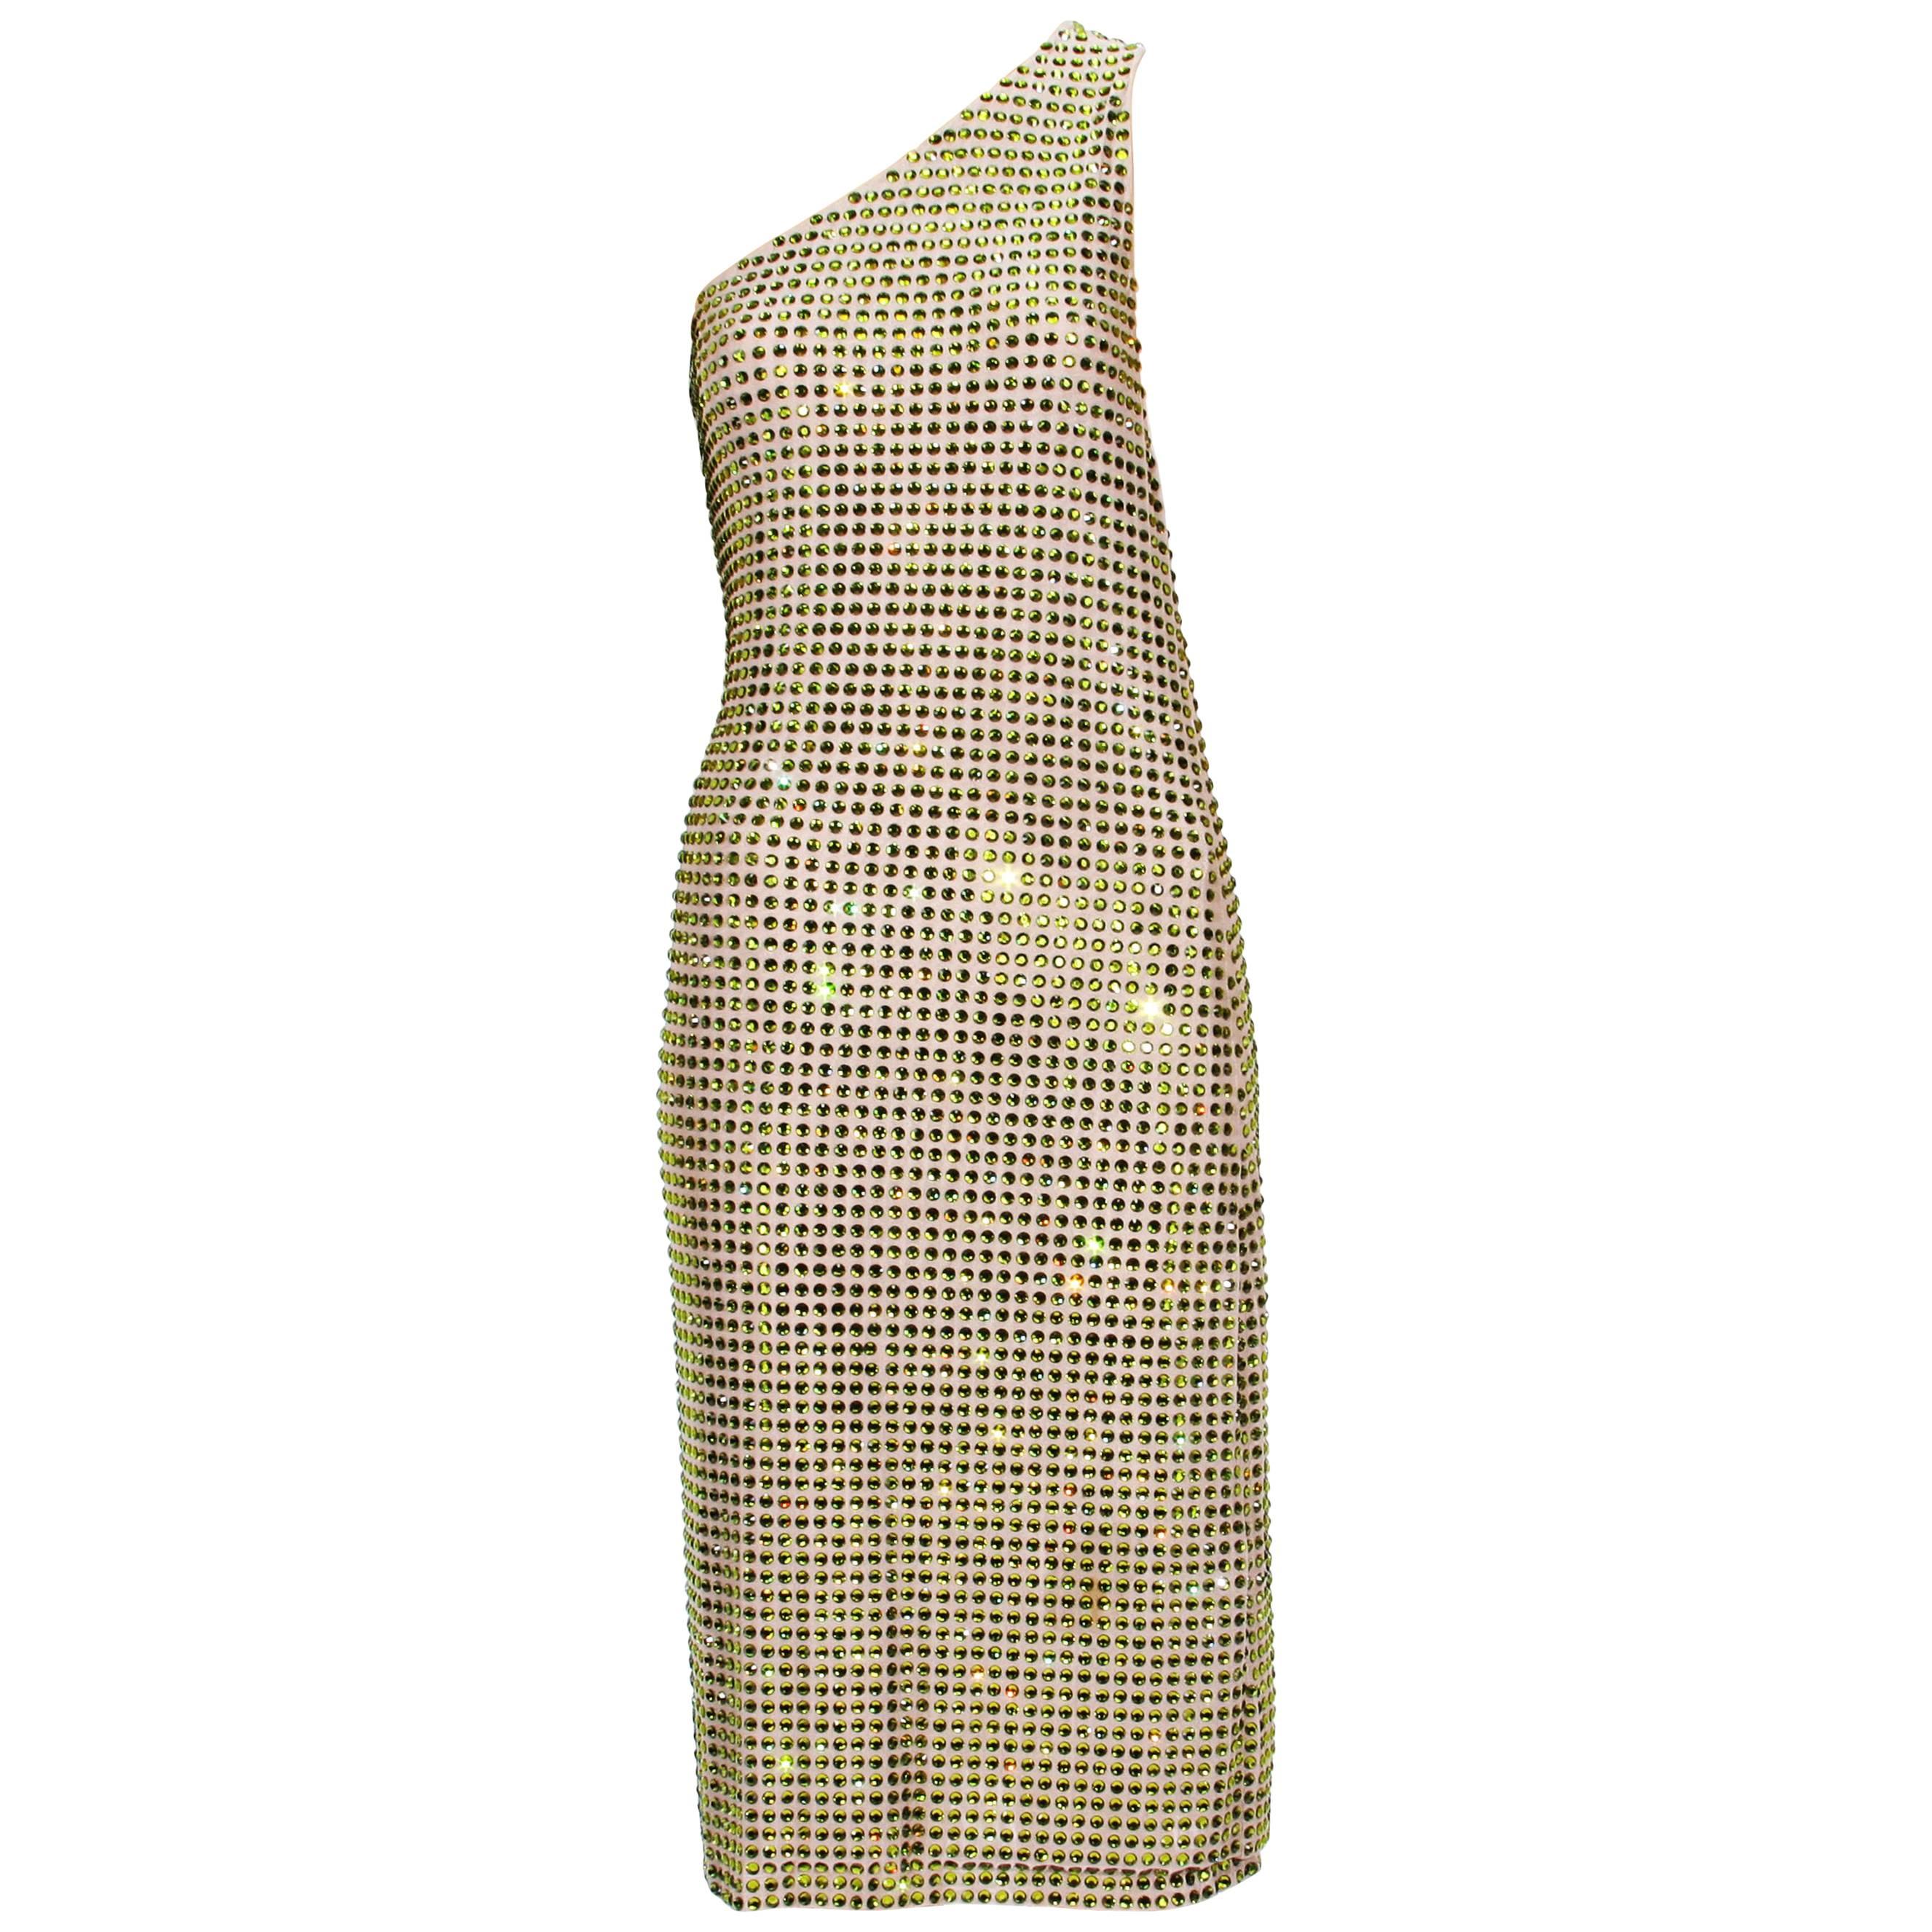 Tom Ford for Gucci SS 2000 Runway Fully Crystal Embellished Open Back Dress 42